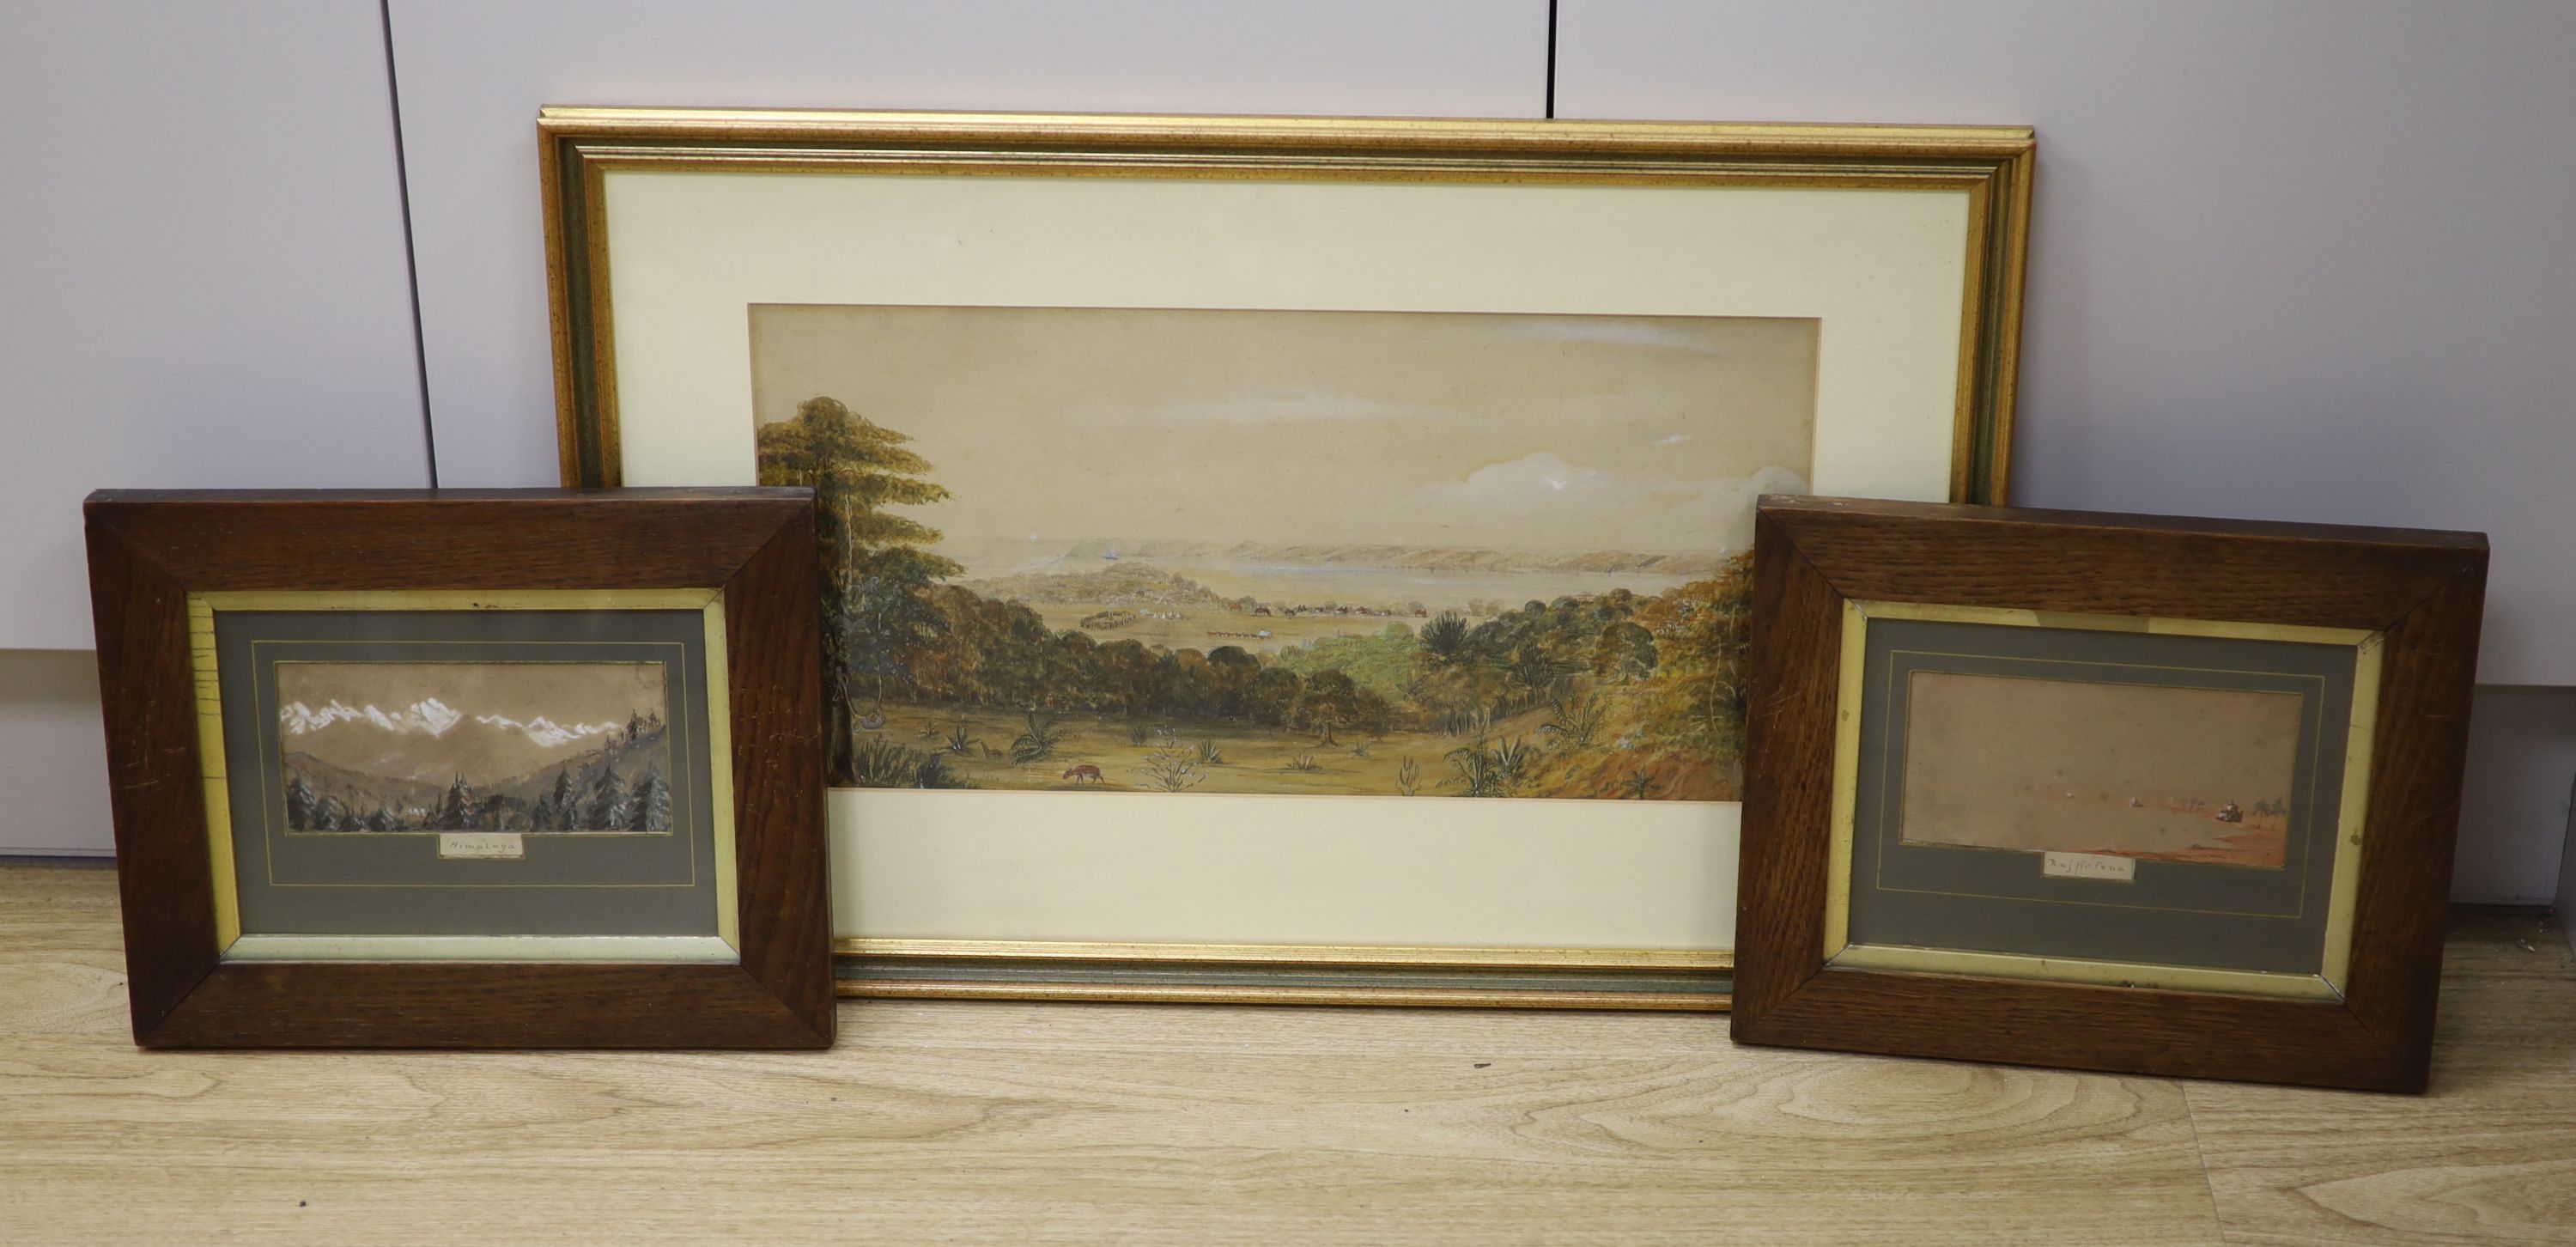 19th century English School, watercolour, 'Natal Bay and Durban from the Berea 1849', 23 x 47cm, with two small views of 'Himalaya' and 'Rajpotana', 8 x 17cm